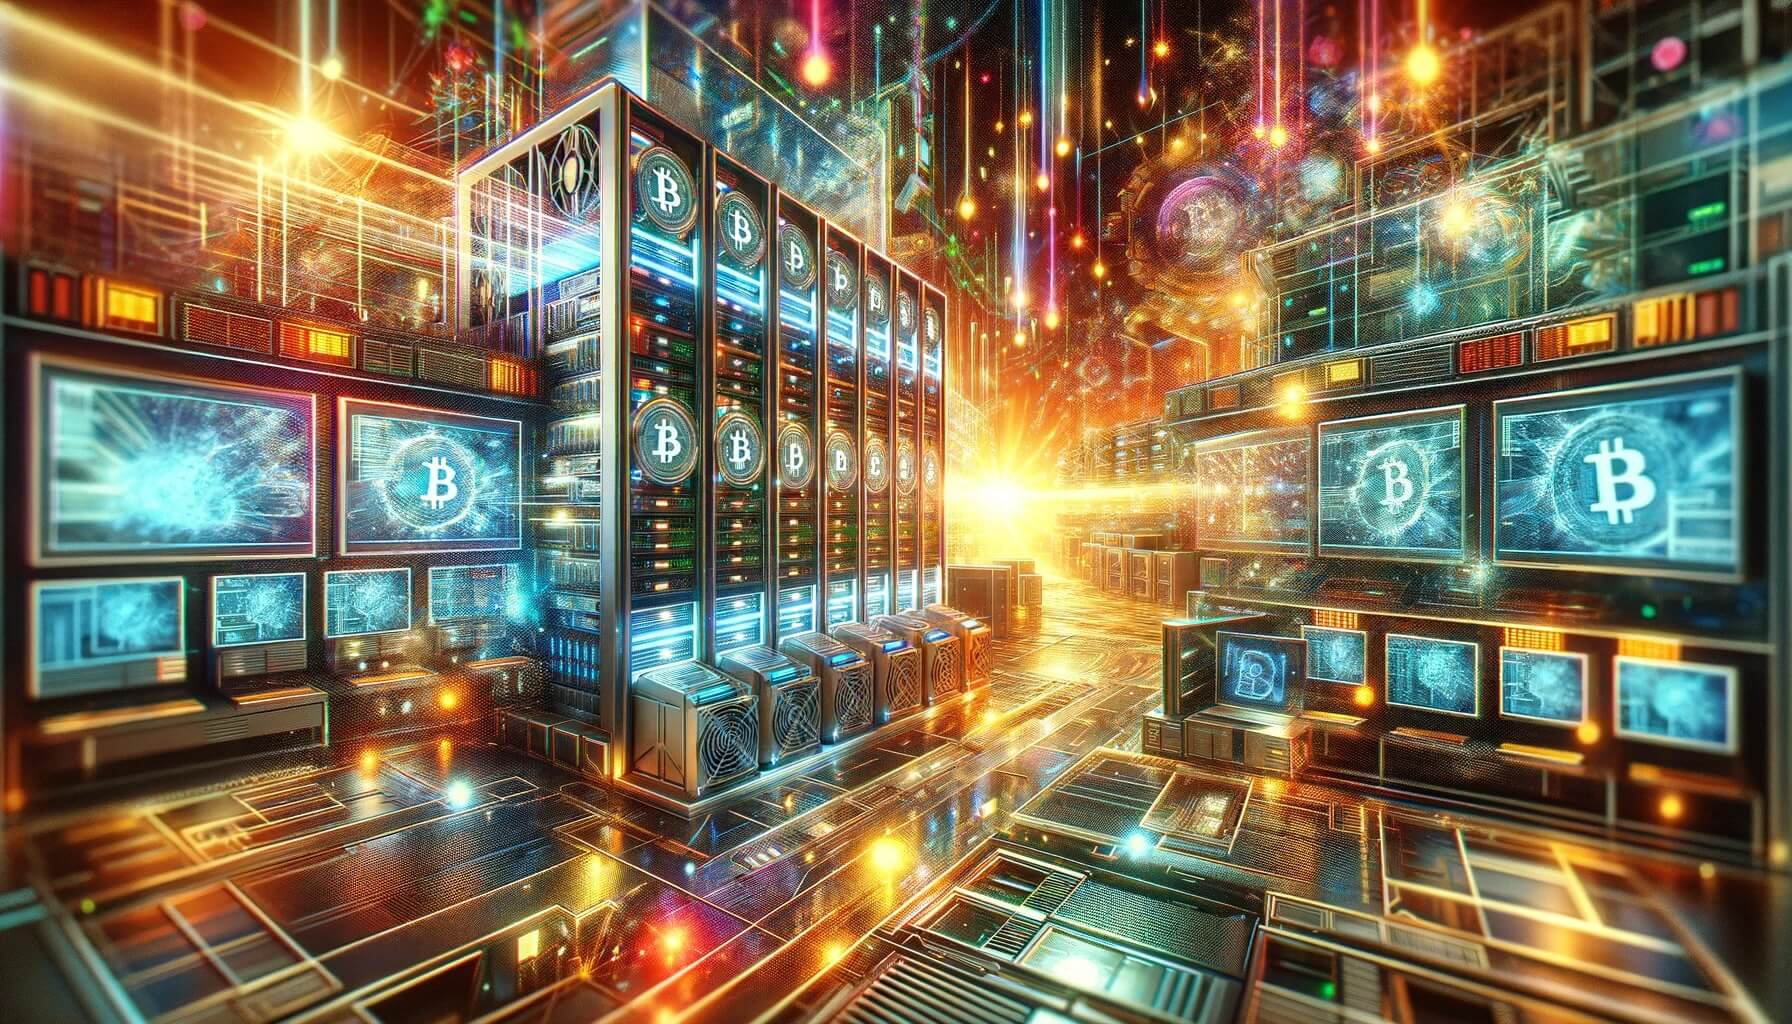 Dall%C2%B7E 2023 11 28 17.25.43 A Futuristic Dynamic And Vibrant Depiction Of A Decentralized Bitcoin Mining Rig For A Cover Image. The Scene Is Filled With Elaborate High Tech Com